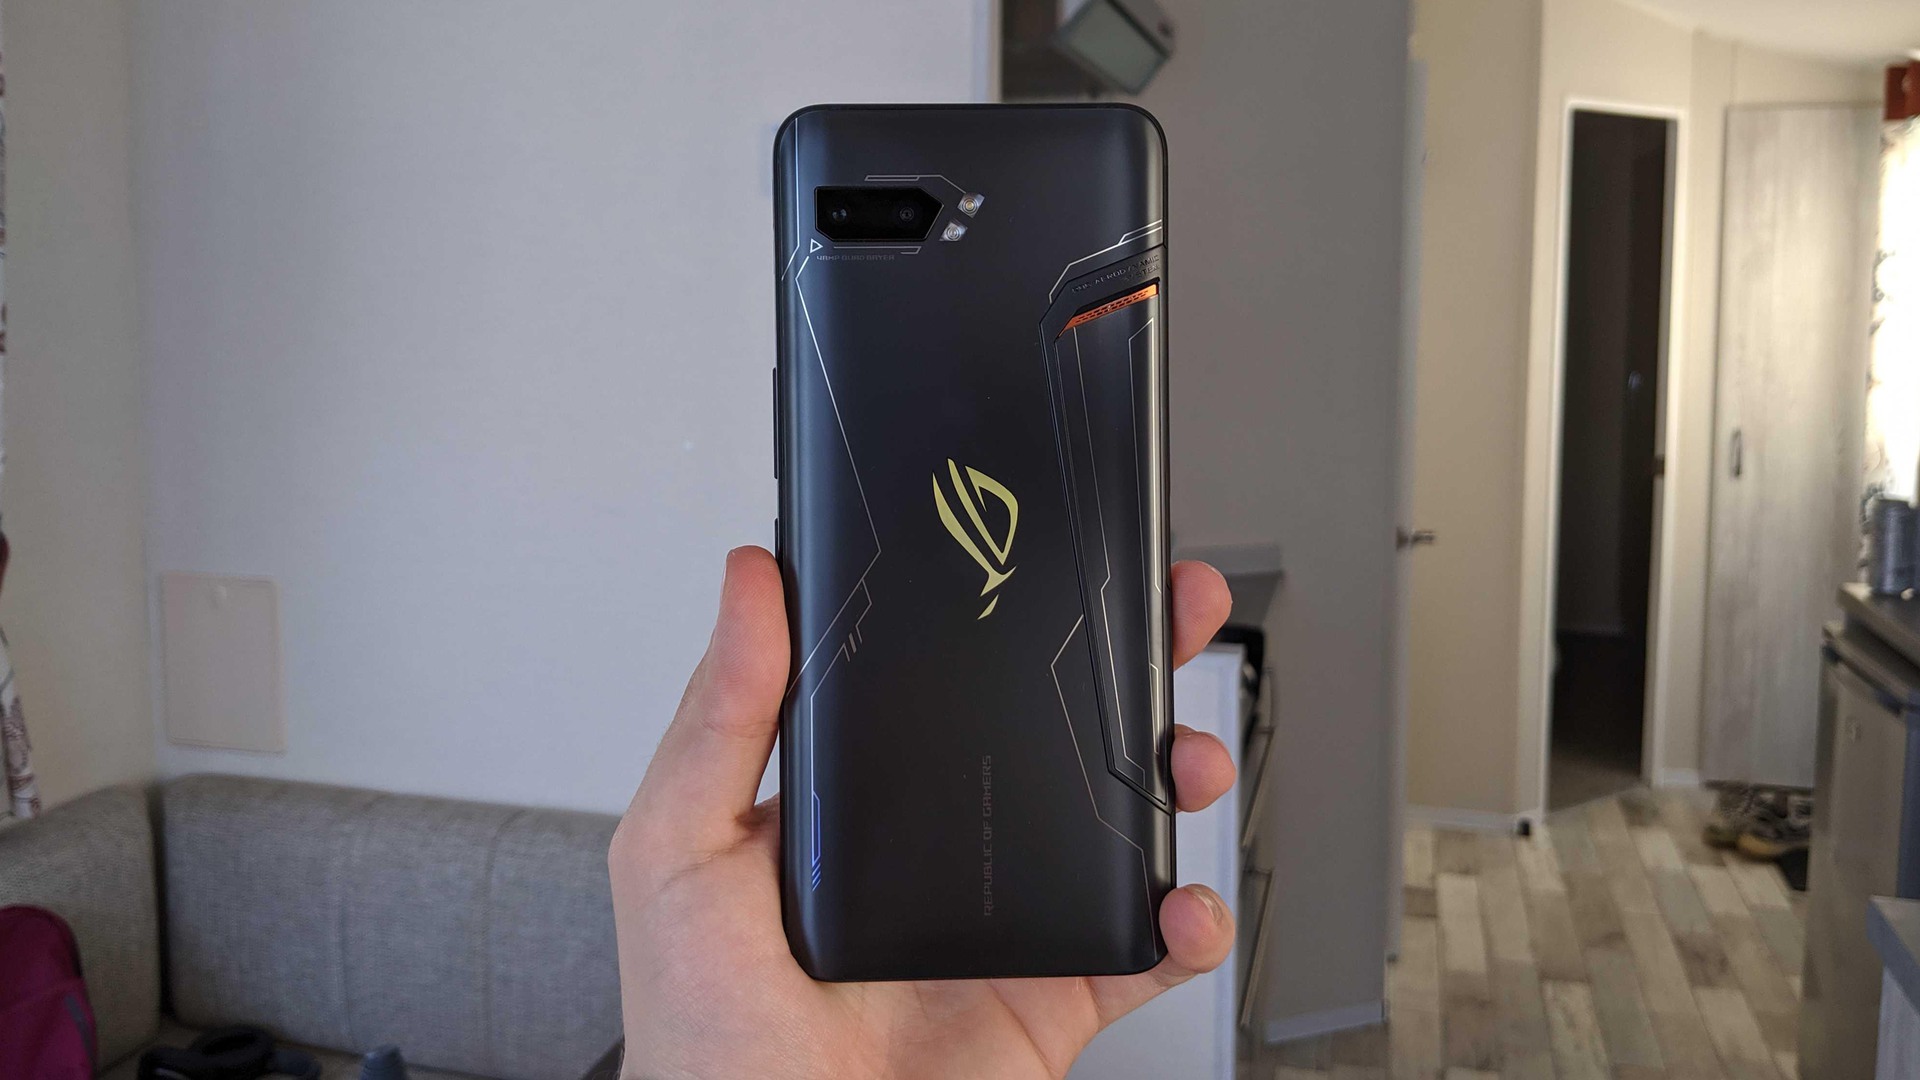 The ROG Phone 3 will pick up where the ROG Phone 2 left off.